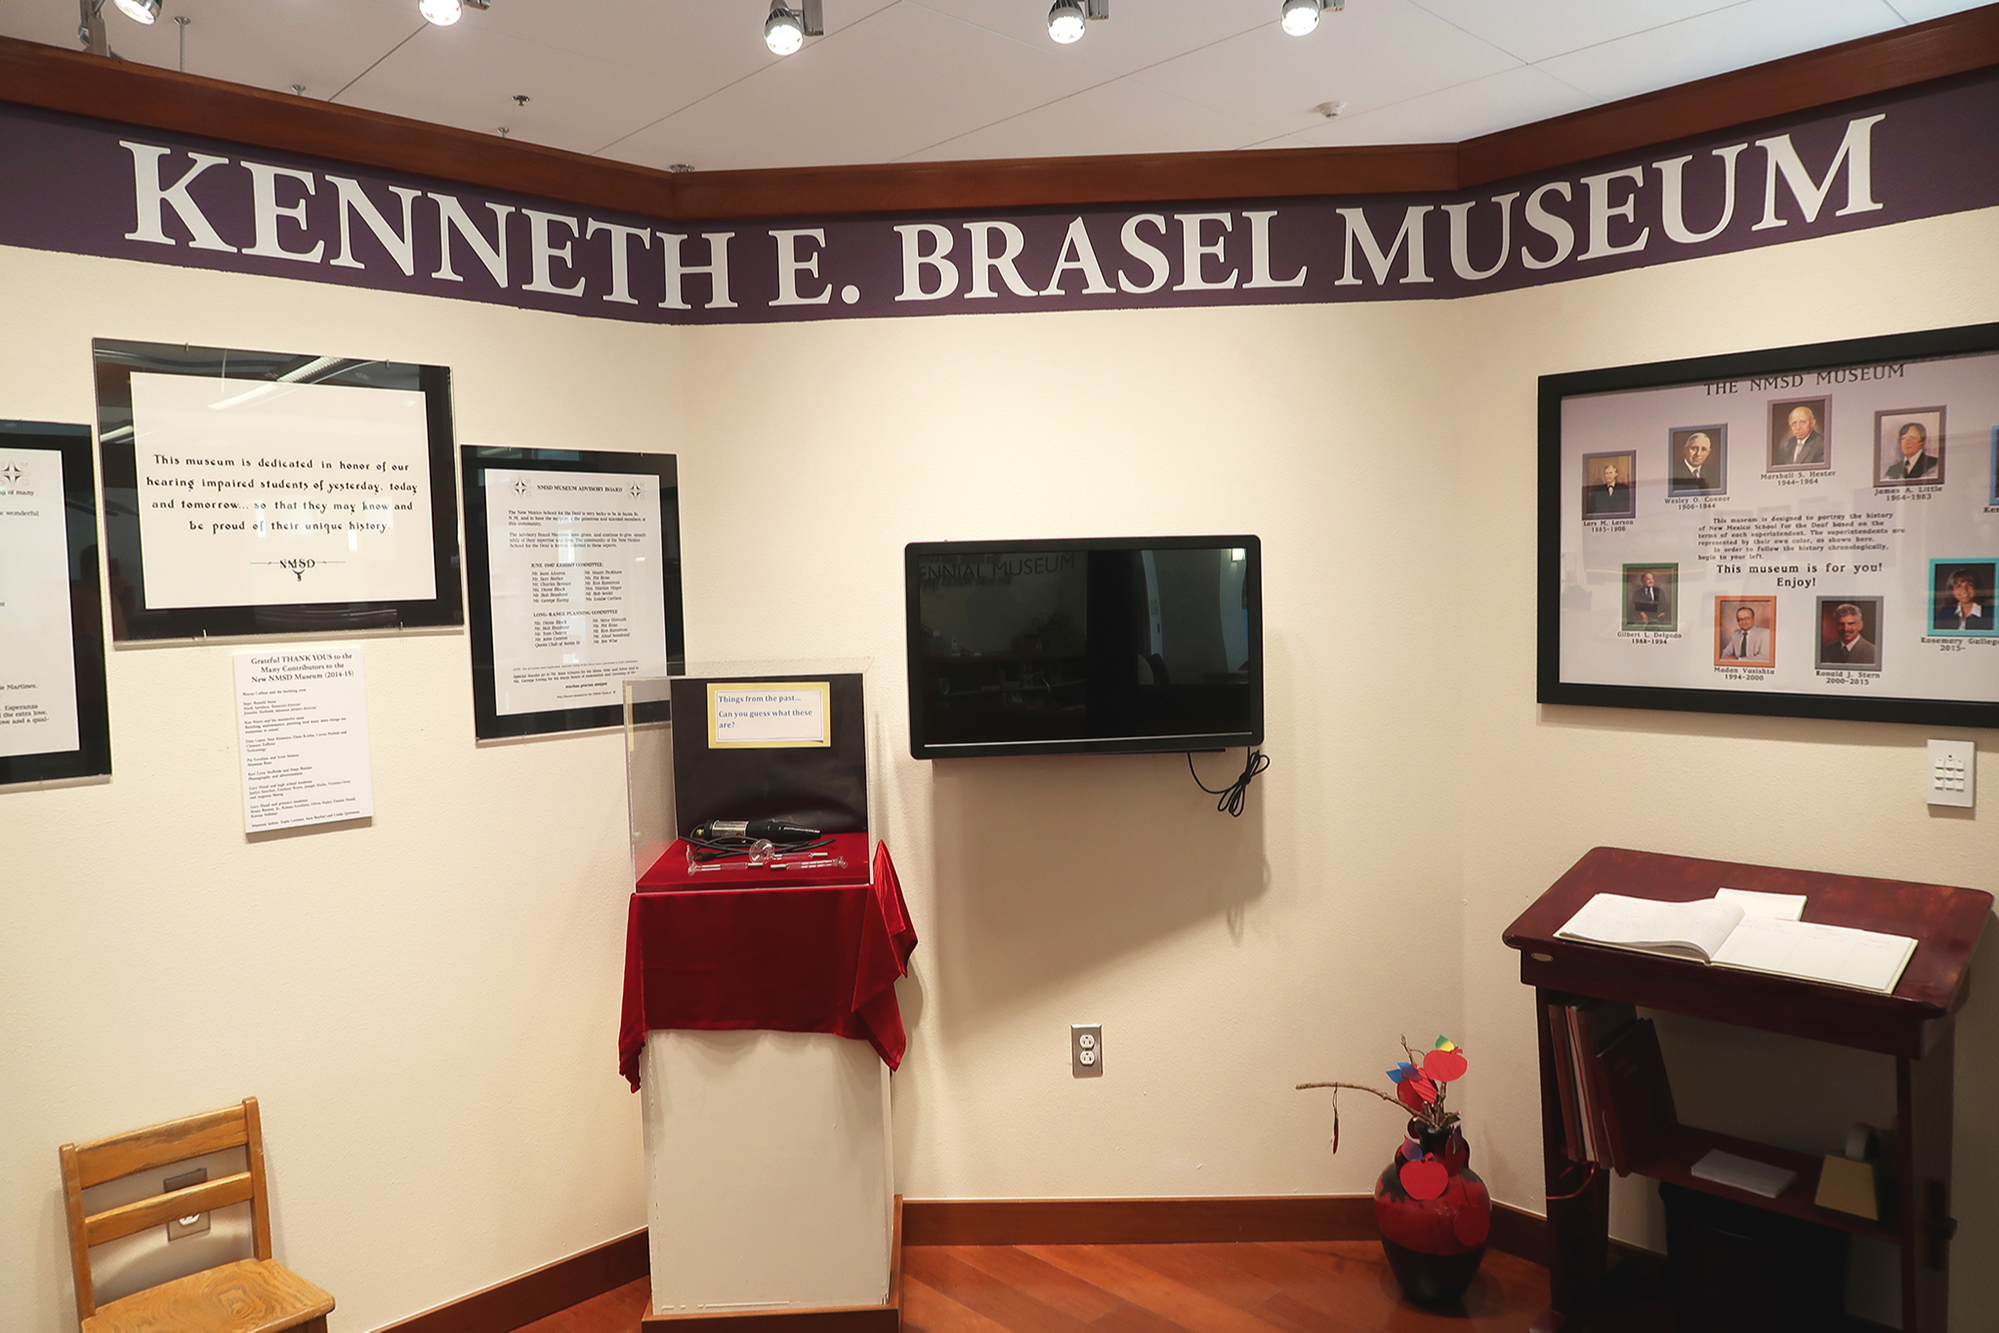 Superintendent Kenneth E. Brasel's welcome wall in the NMSD Museum.